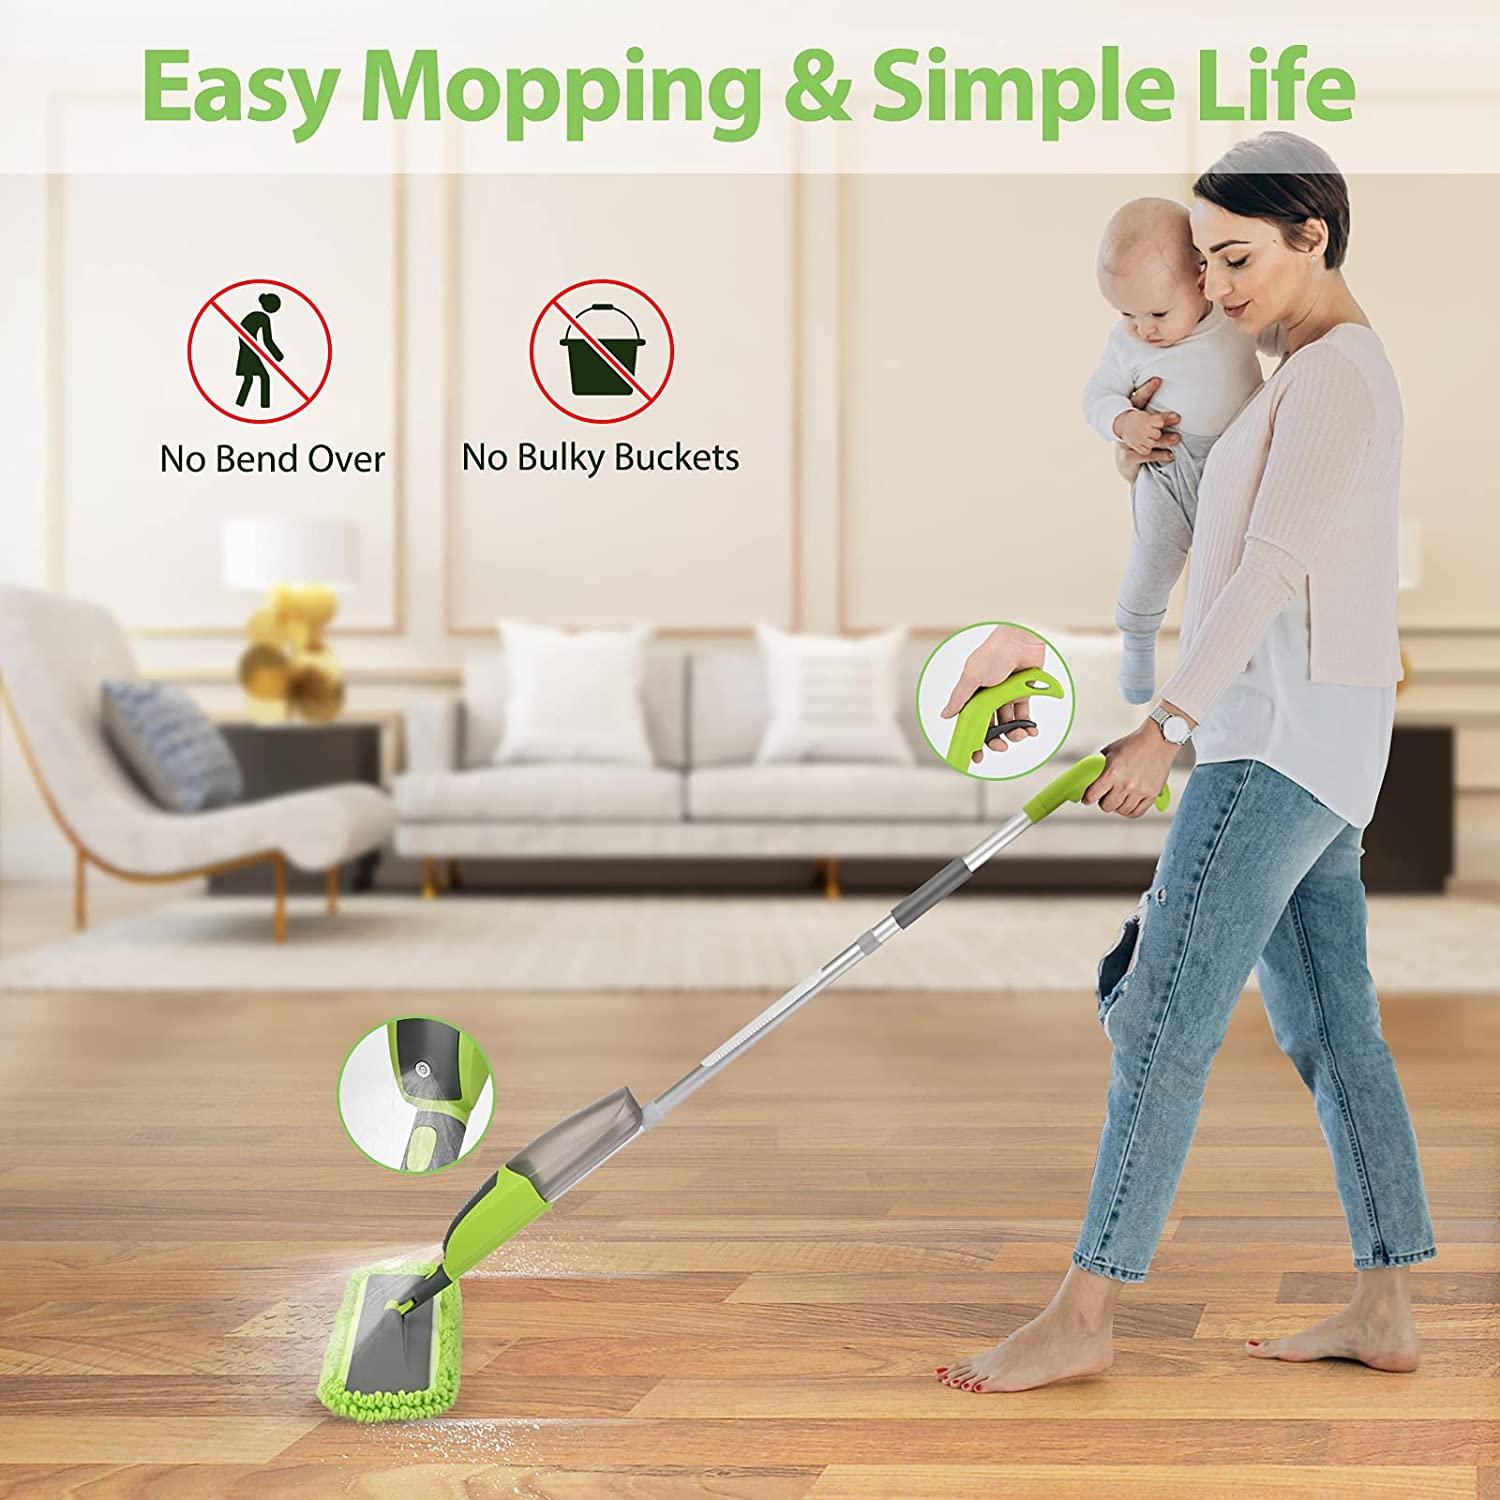 Spray Mop for Hardwood Floor Cleaning Professional - M - Bed Bath